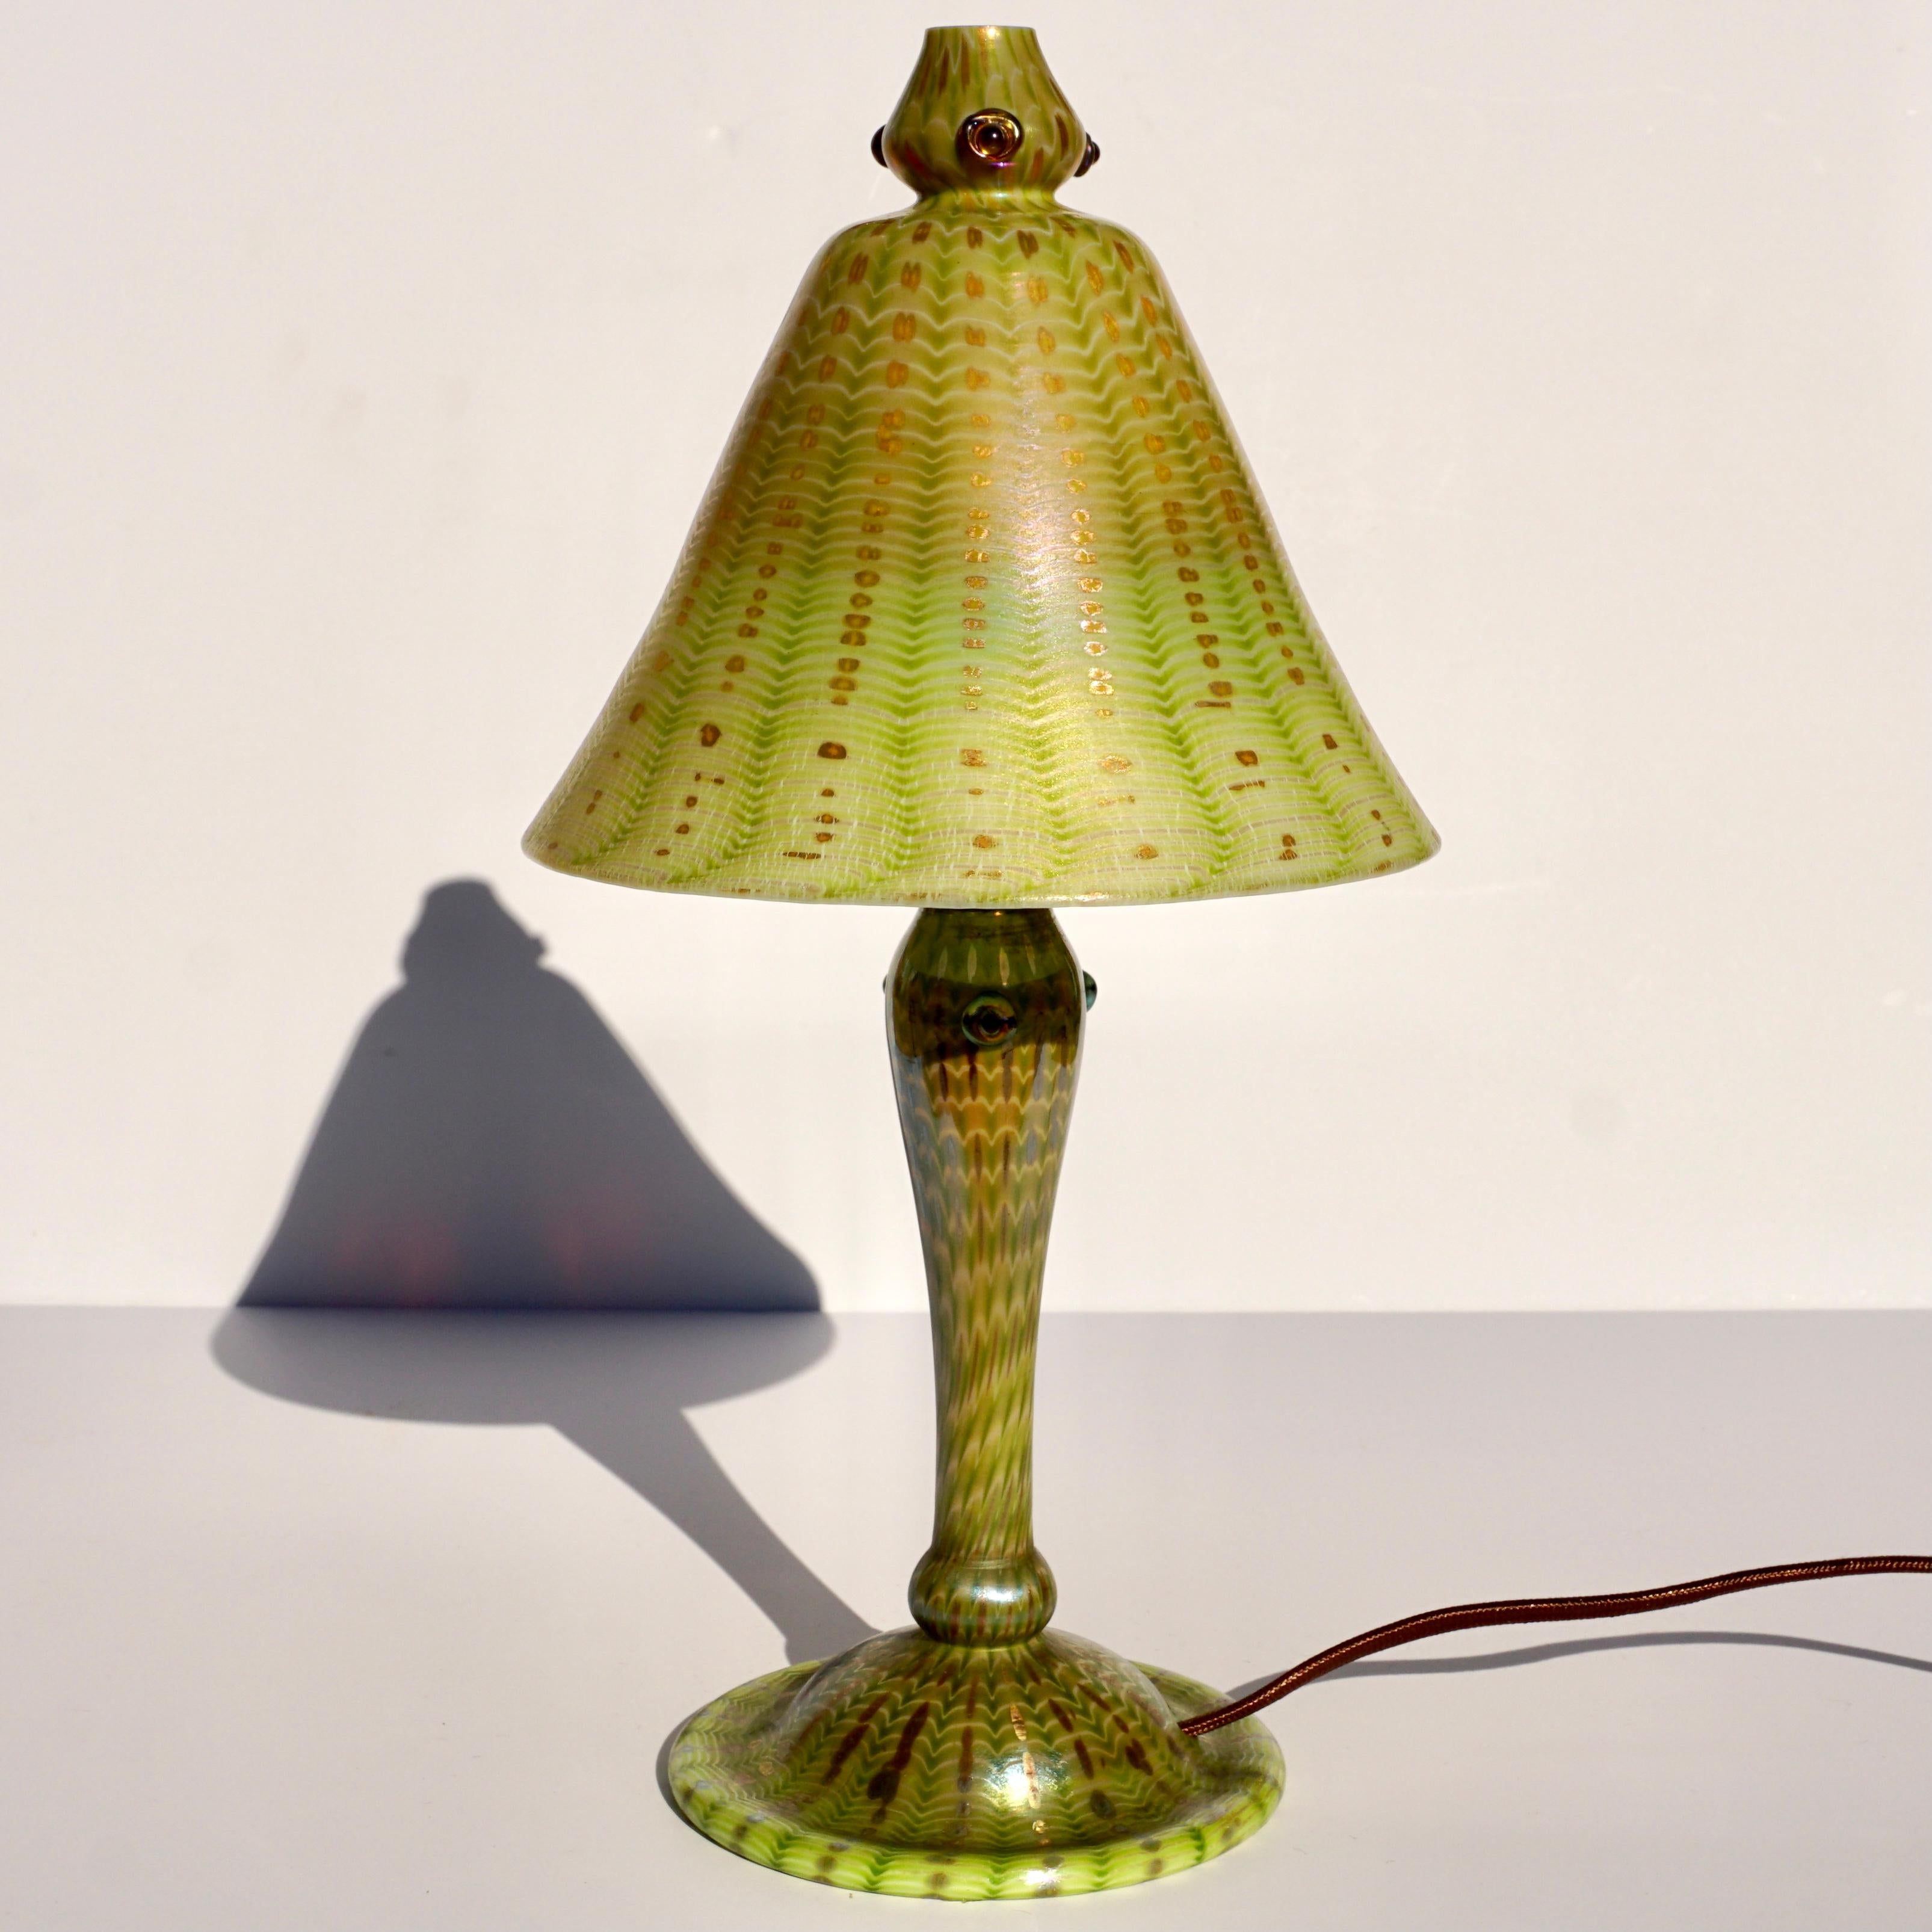 Tiffany Favrile Arabian lamp. Art Nouveau, circa 1910 

Tiffany Arabian lamp has blown glass shade and base. Shade is decorated with a green iridescent zipper design against a wave gold and yellow background. Top of shade is further decorated with